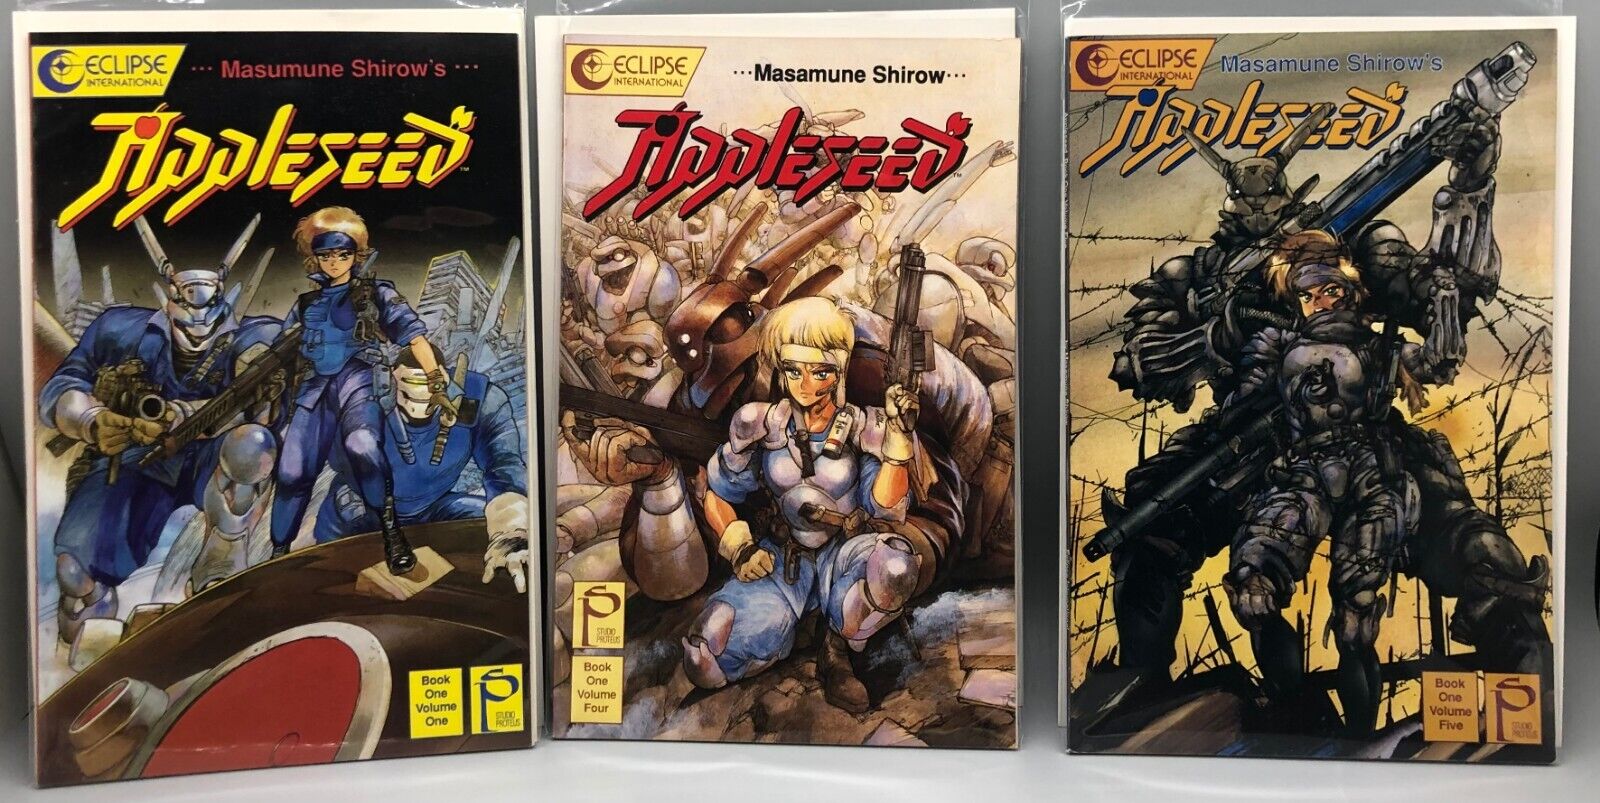 Appleseed (12) Issue lot Book 1 + Book 2 Eclipse Comics Manga Masamune Shirow's